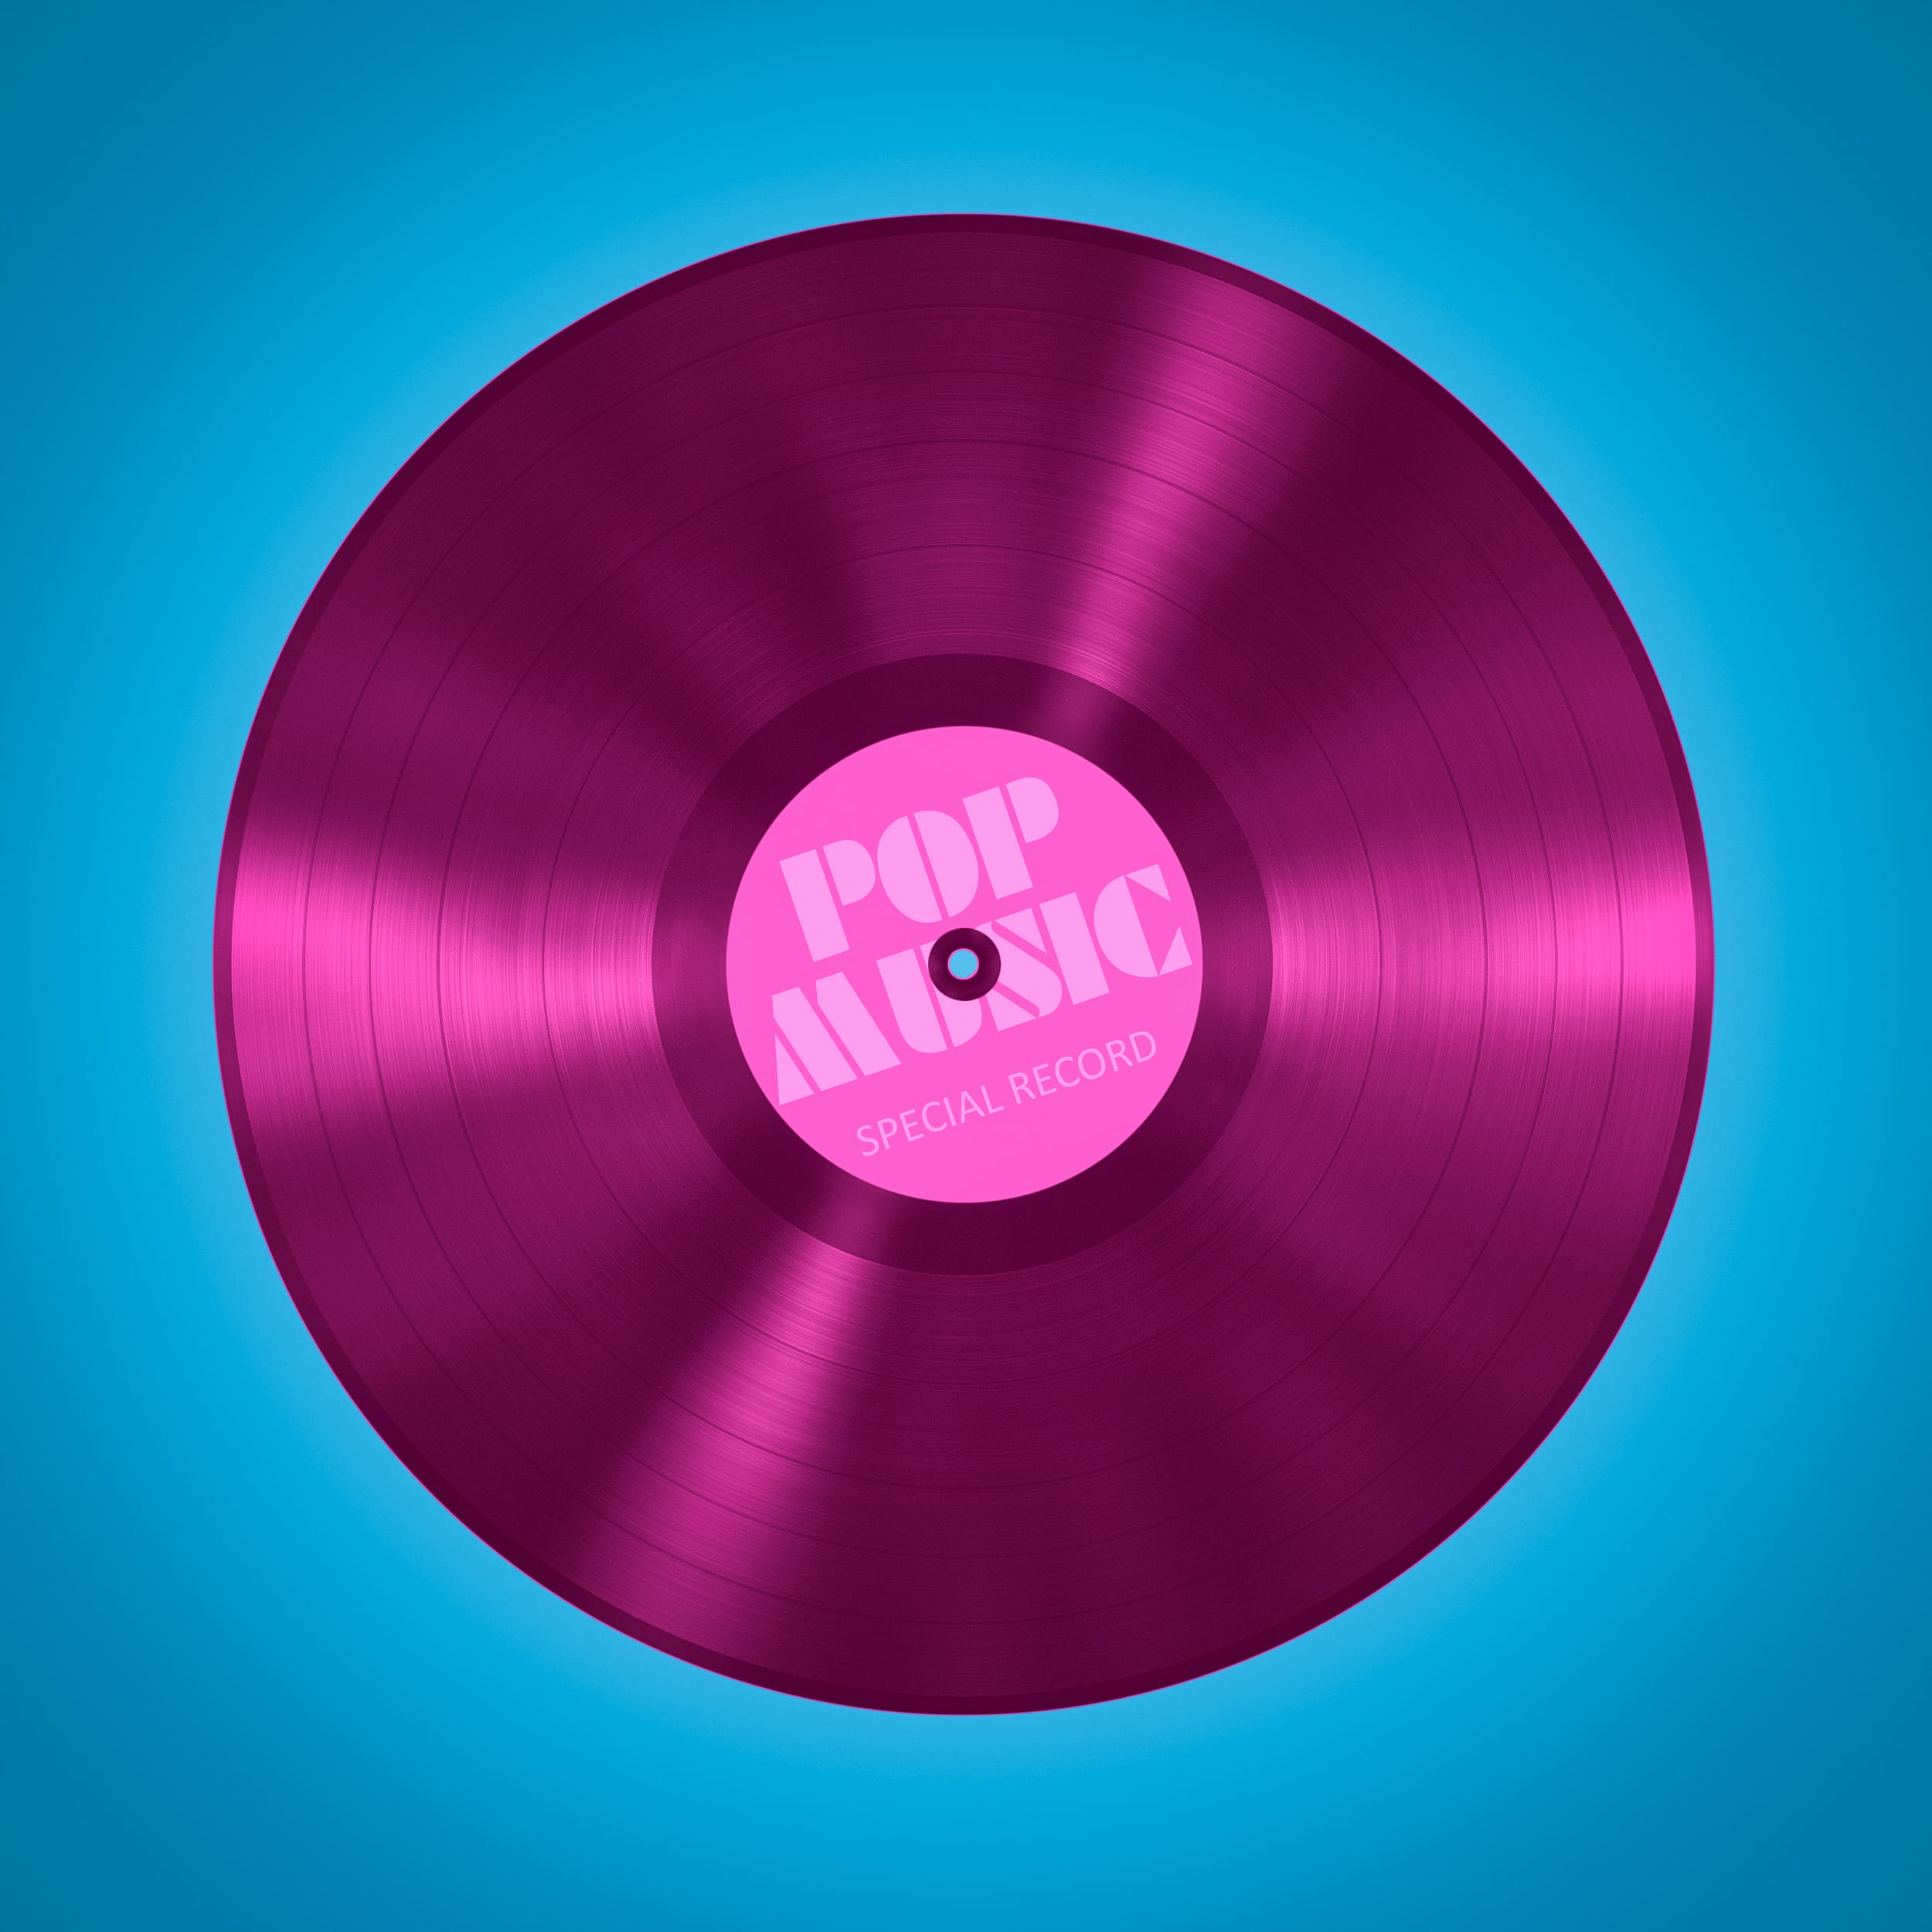 An illustration of an old vinyl record of pop music